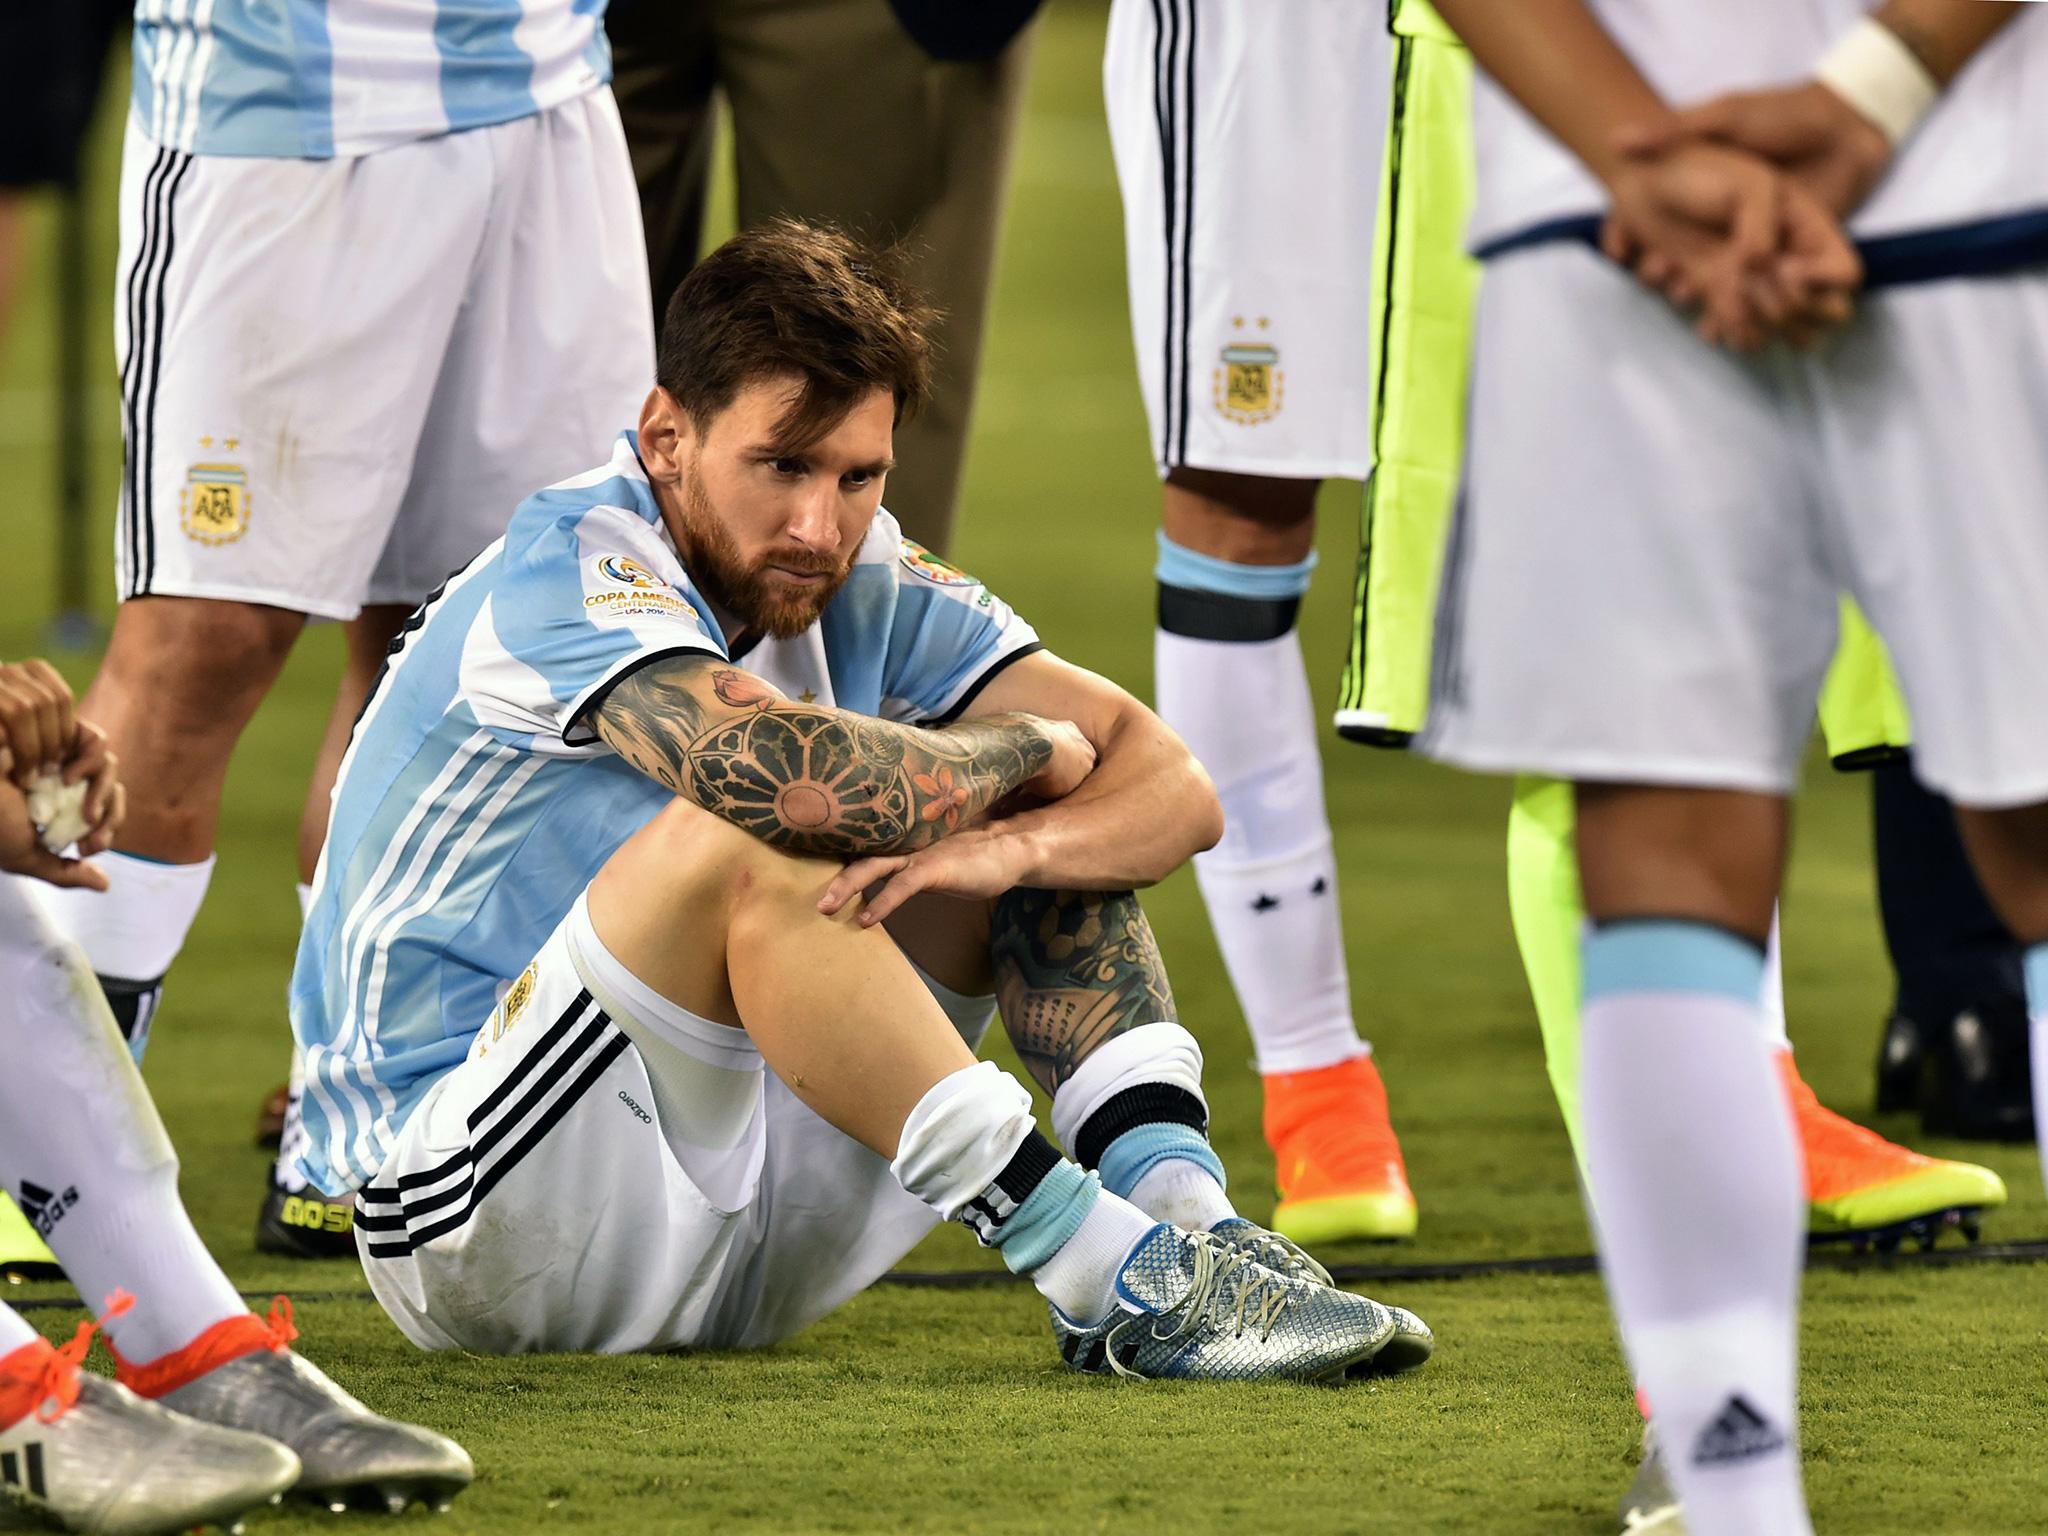 Messi was visibly upset by Argentina's defeat in the Copa America final